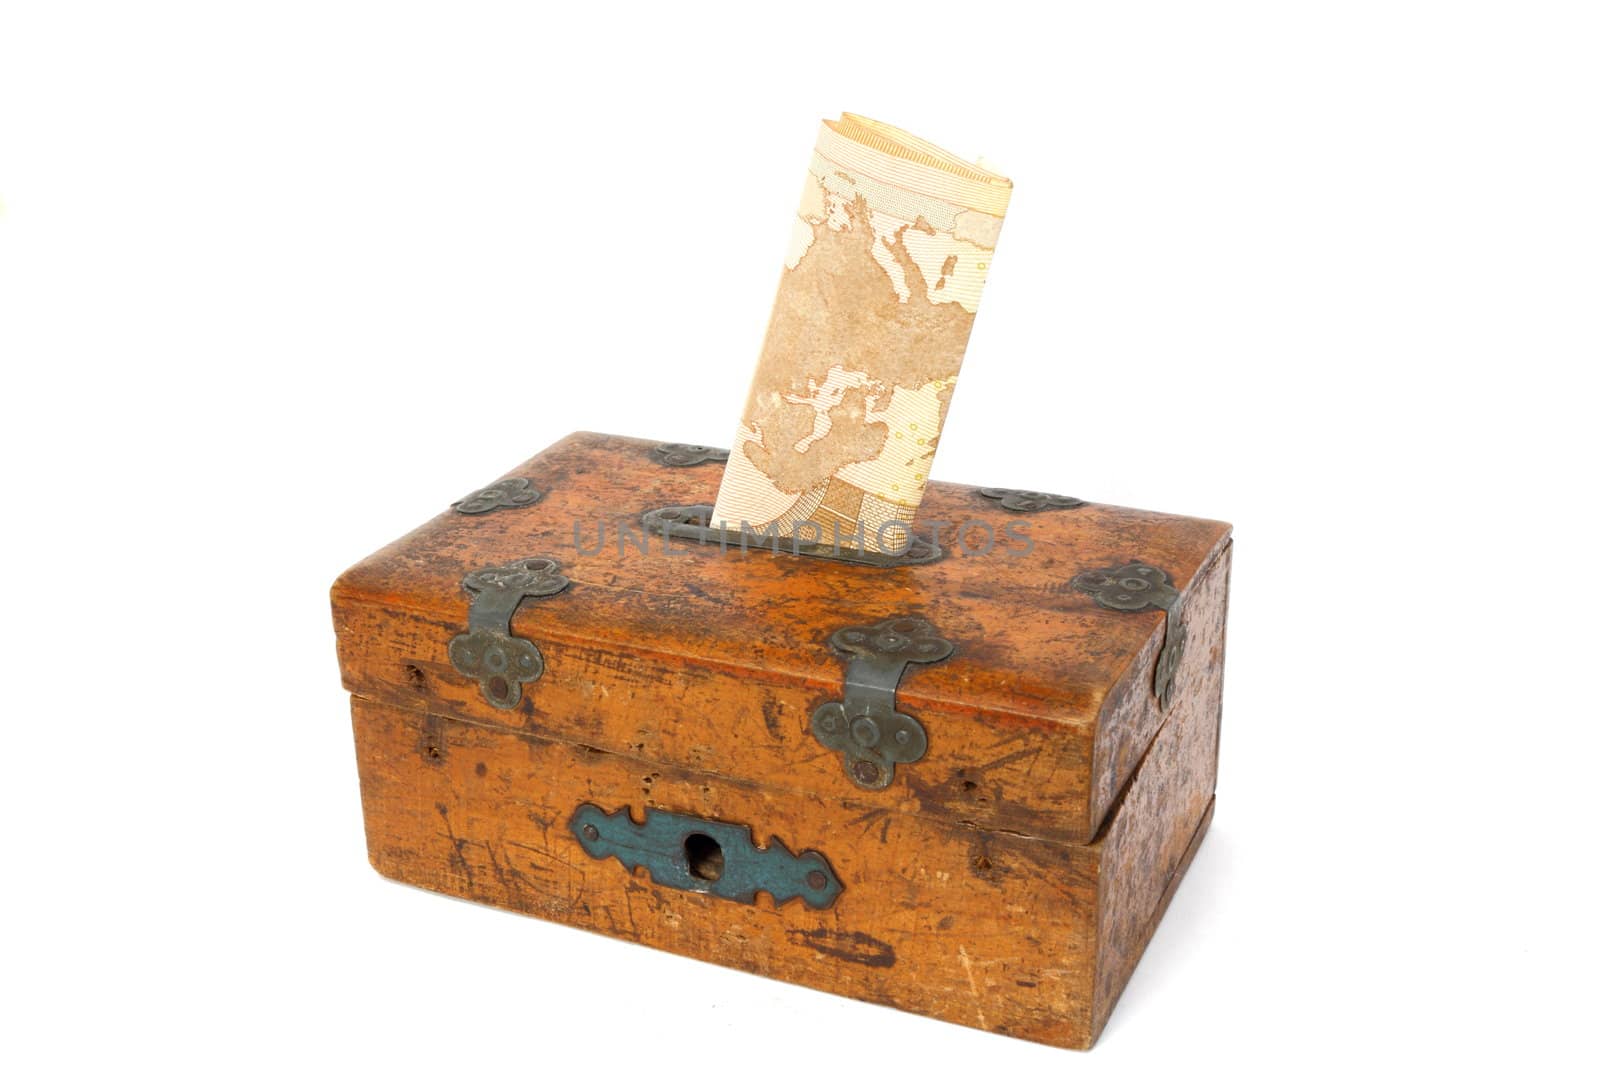 new money in old moneybox by taviphoto